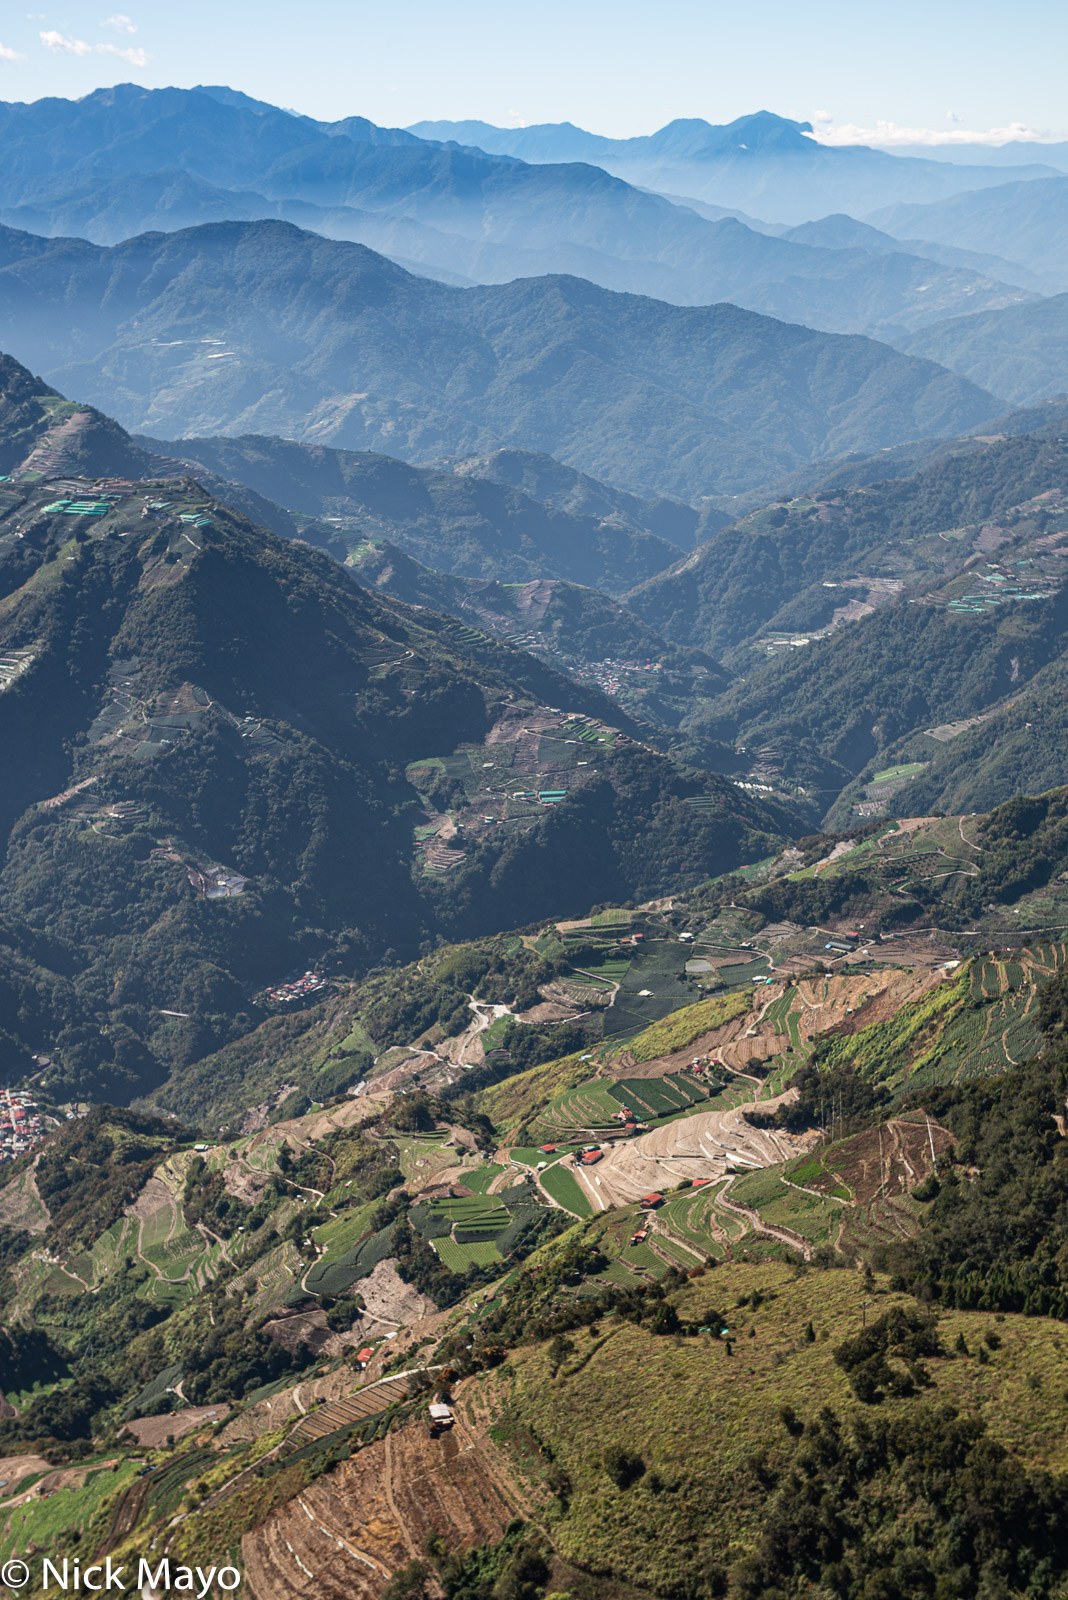 Ridges of the central mountain ranges as seen from the village Bo-Wang.